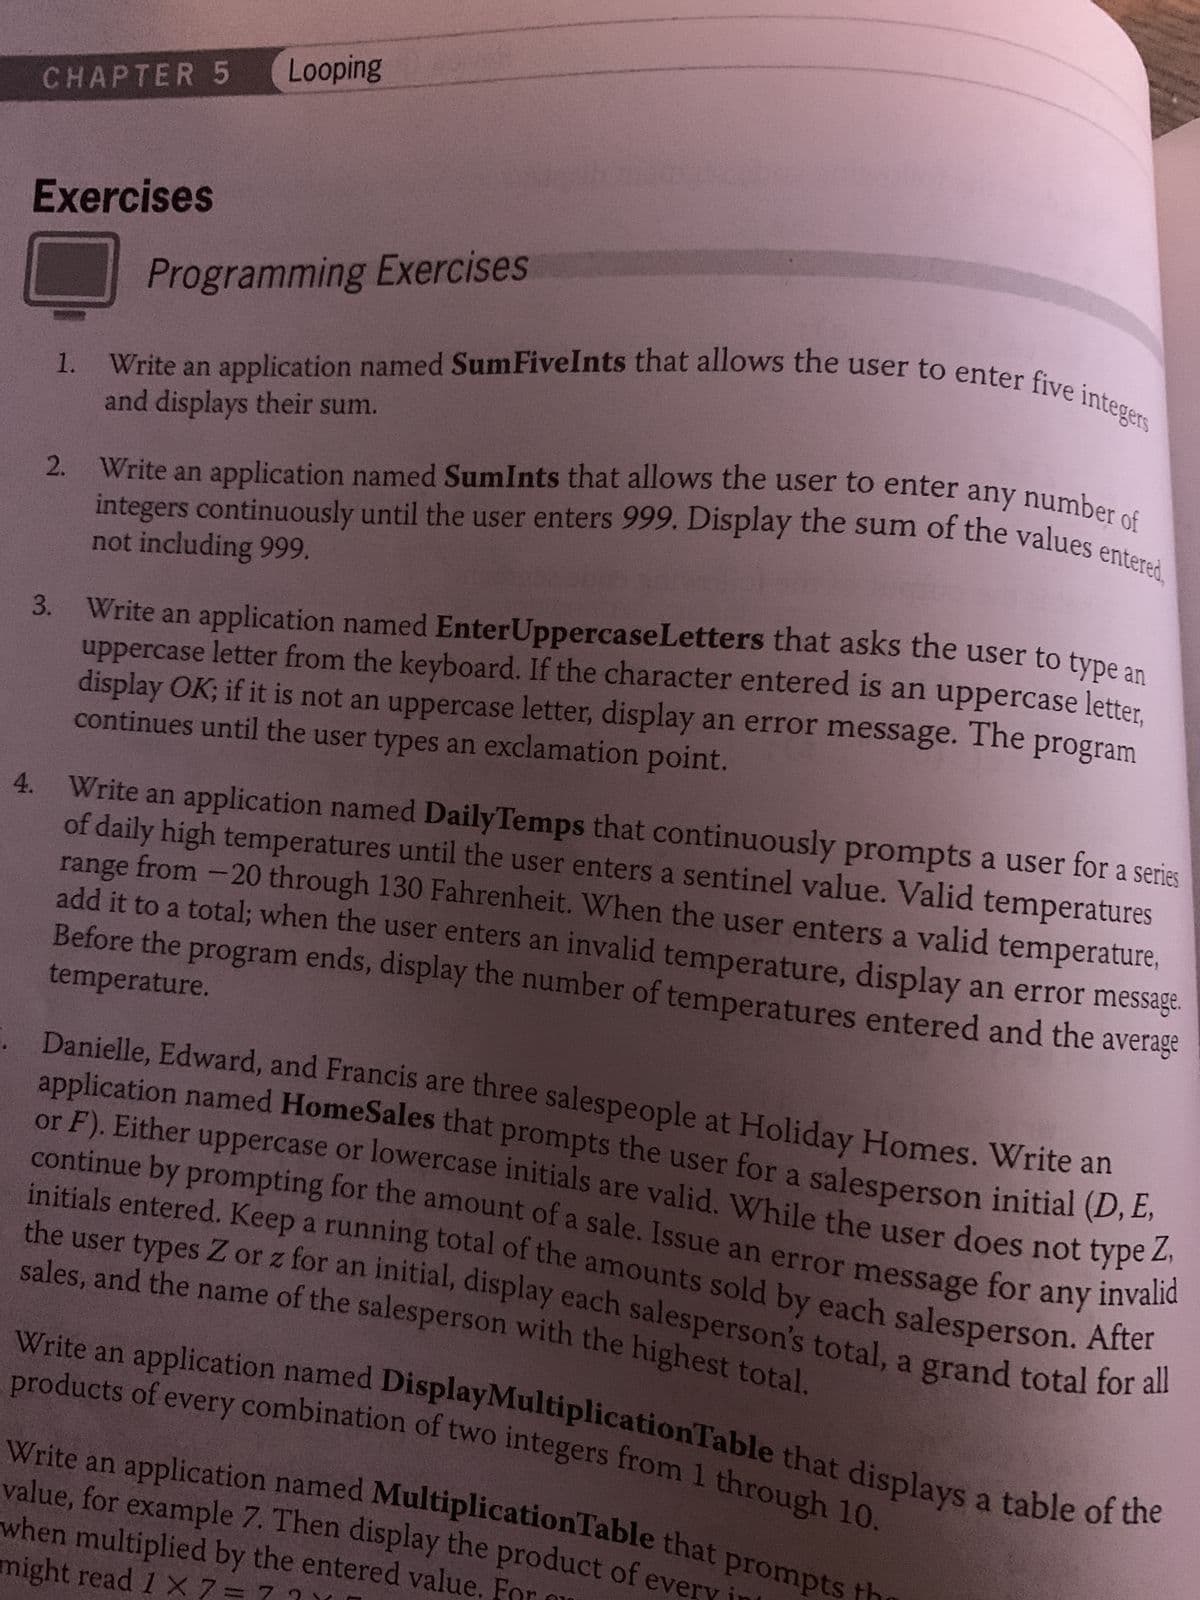 CHAPTER 5
Exercises
4.
3.
2.
Looping
Programming Exercises
1. Write an application named SumFiveInts that allows the user to enter five integers
and displays their sum.
Write an application named SumInts that allows the user to enter any number of
integers continuously until the user enters 999. Display the sum of the values e
not
999.
Write an application named Enter Uppercase Letters that asks the user to type an
uppercase letter from the keyboard. If the character entered is an uppercase letter,
display OK; if it is not an uppercase letter, display an error message. The program
continues until the user types an exclamation point.
range
Write an application named DailyTemps that continuously prompts a user for a series
of daily high temperatures until the user enters a sentinel value. Valid temperatures
from -20 through 130 Fahrenheit. When the user enters a valid temperature,
temperature.
add it to a total; when the user enters an invalid temperature, display an error message.
Before the program ends, display the number of temperatures entered and the average
Danielle, Edward, and Francis are three salespeople at Holiday Homes. Write an
application named HomeSales that prompts the user for a salesperson initial (D, E,
or F). Either uppercase or lowercase initials are valid. While the user does not type Z,
continue by prompting for the amount of a sale. Issue an error message for any invalid
initials entered. Keep a running total of the amounts sold by each salesperson. After
sales, and the name of the salesperson with the highest total.
the user types Z or z for an initial, display each salesperson's total, a grand total for all
products of every combination of two integers from 1 through 10.
Write an application named Display Multiplication Table that displays a table of the
when multiplied by the entered value. For
value, for example 7. Then display the product of every in
Write an application named MultiplicationTable that prompts the
might read 1 X 7=